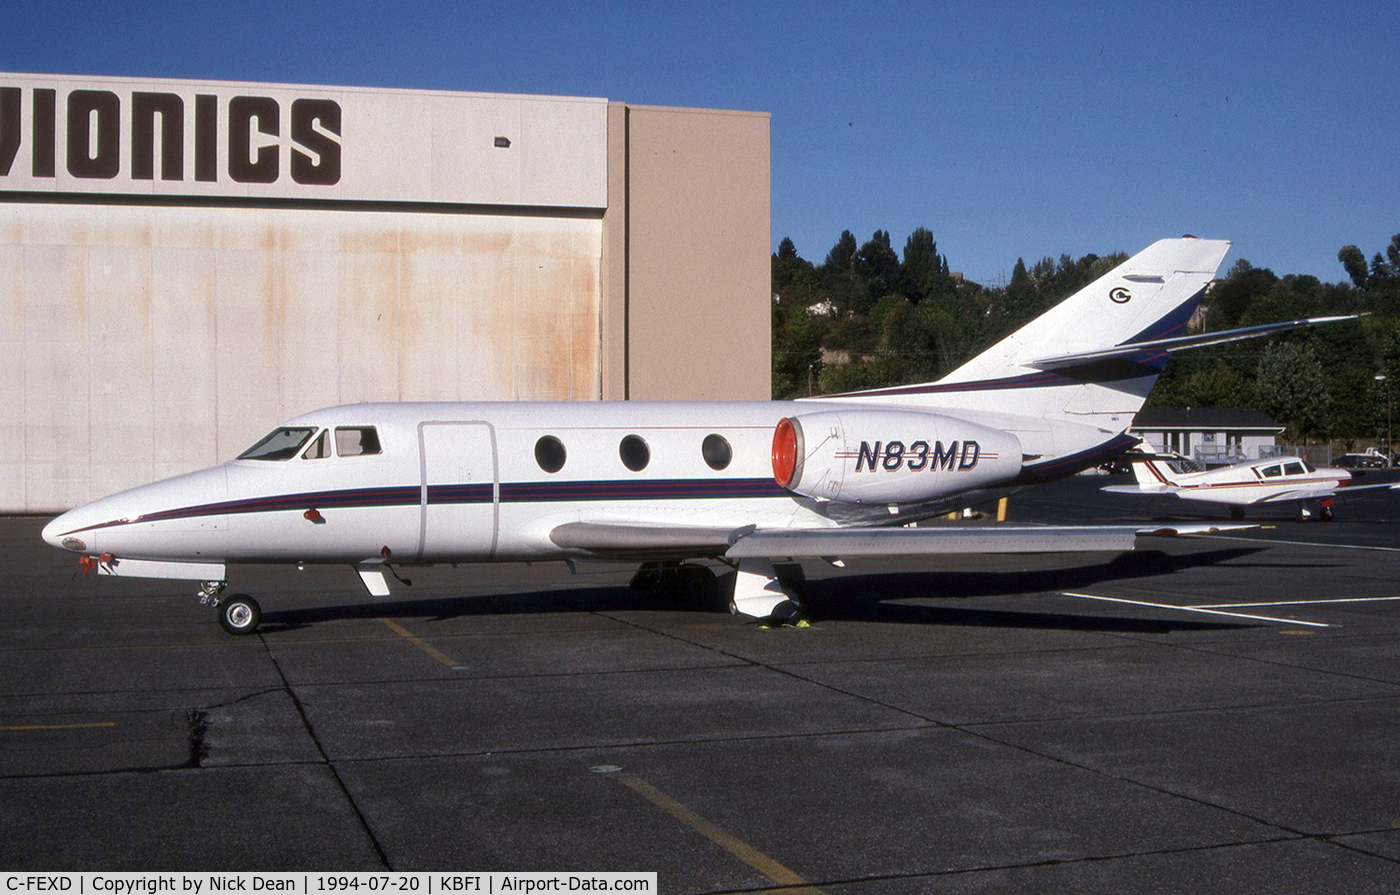 C-FEXD, 1976 Dassault Falcon 10 C/N 78, KBFI (Seen here as N83MD of Mad Dog Aviation this airframe is currently registered C-FEXD as posted_